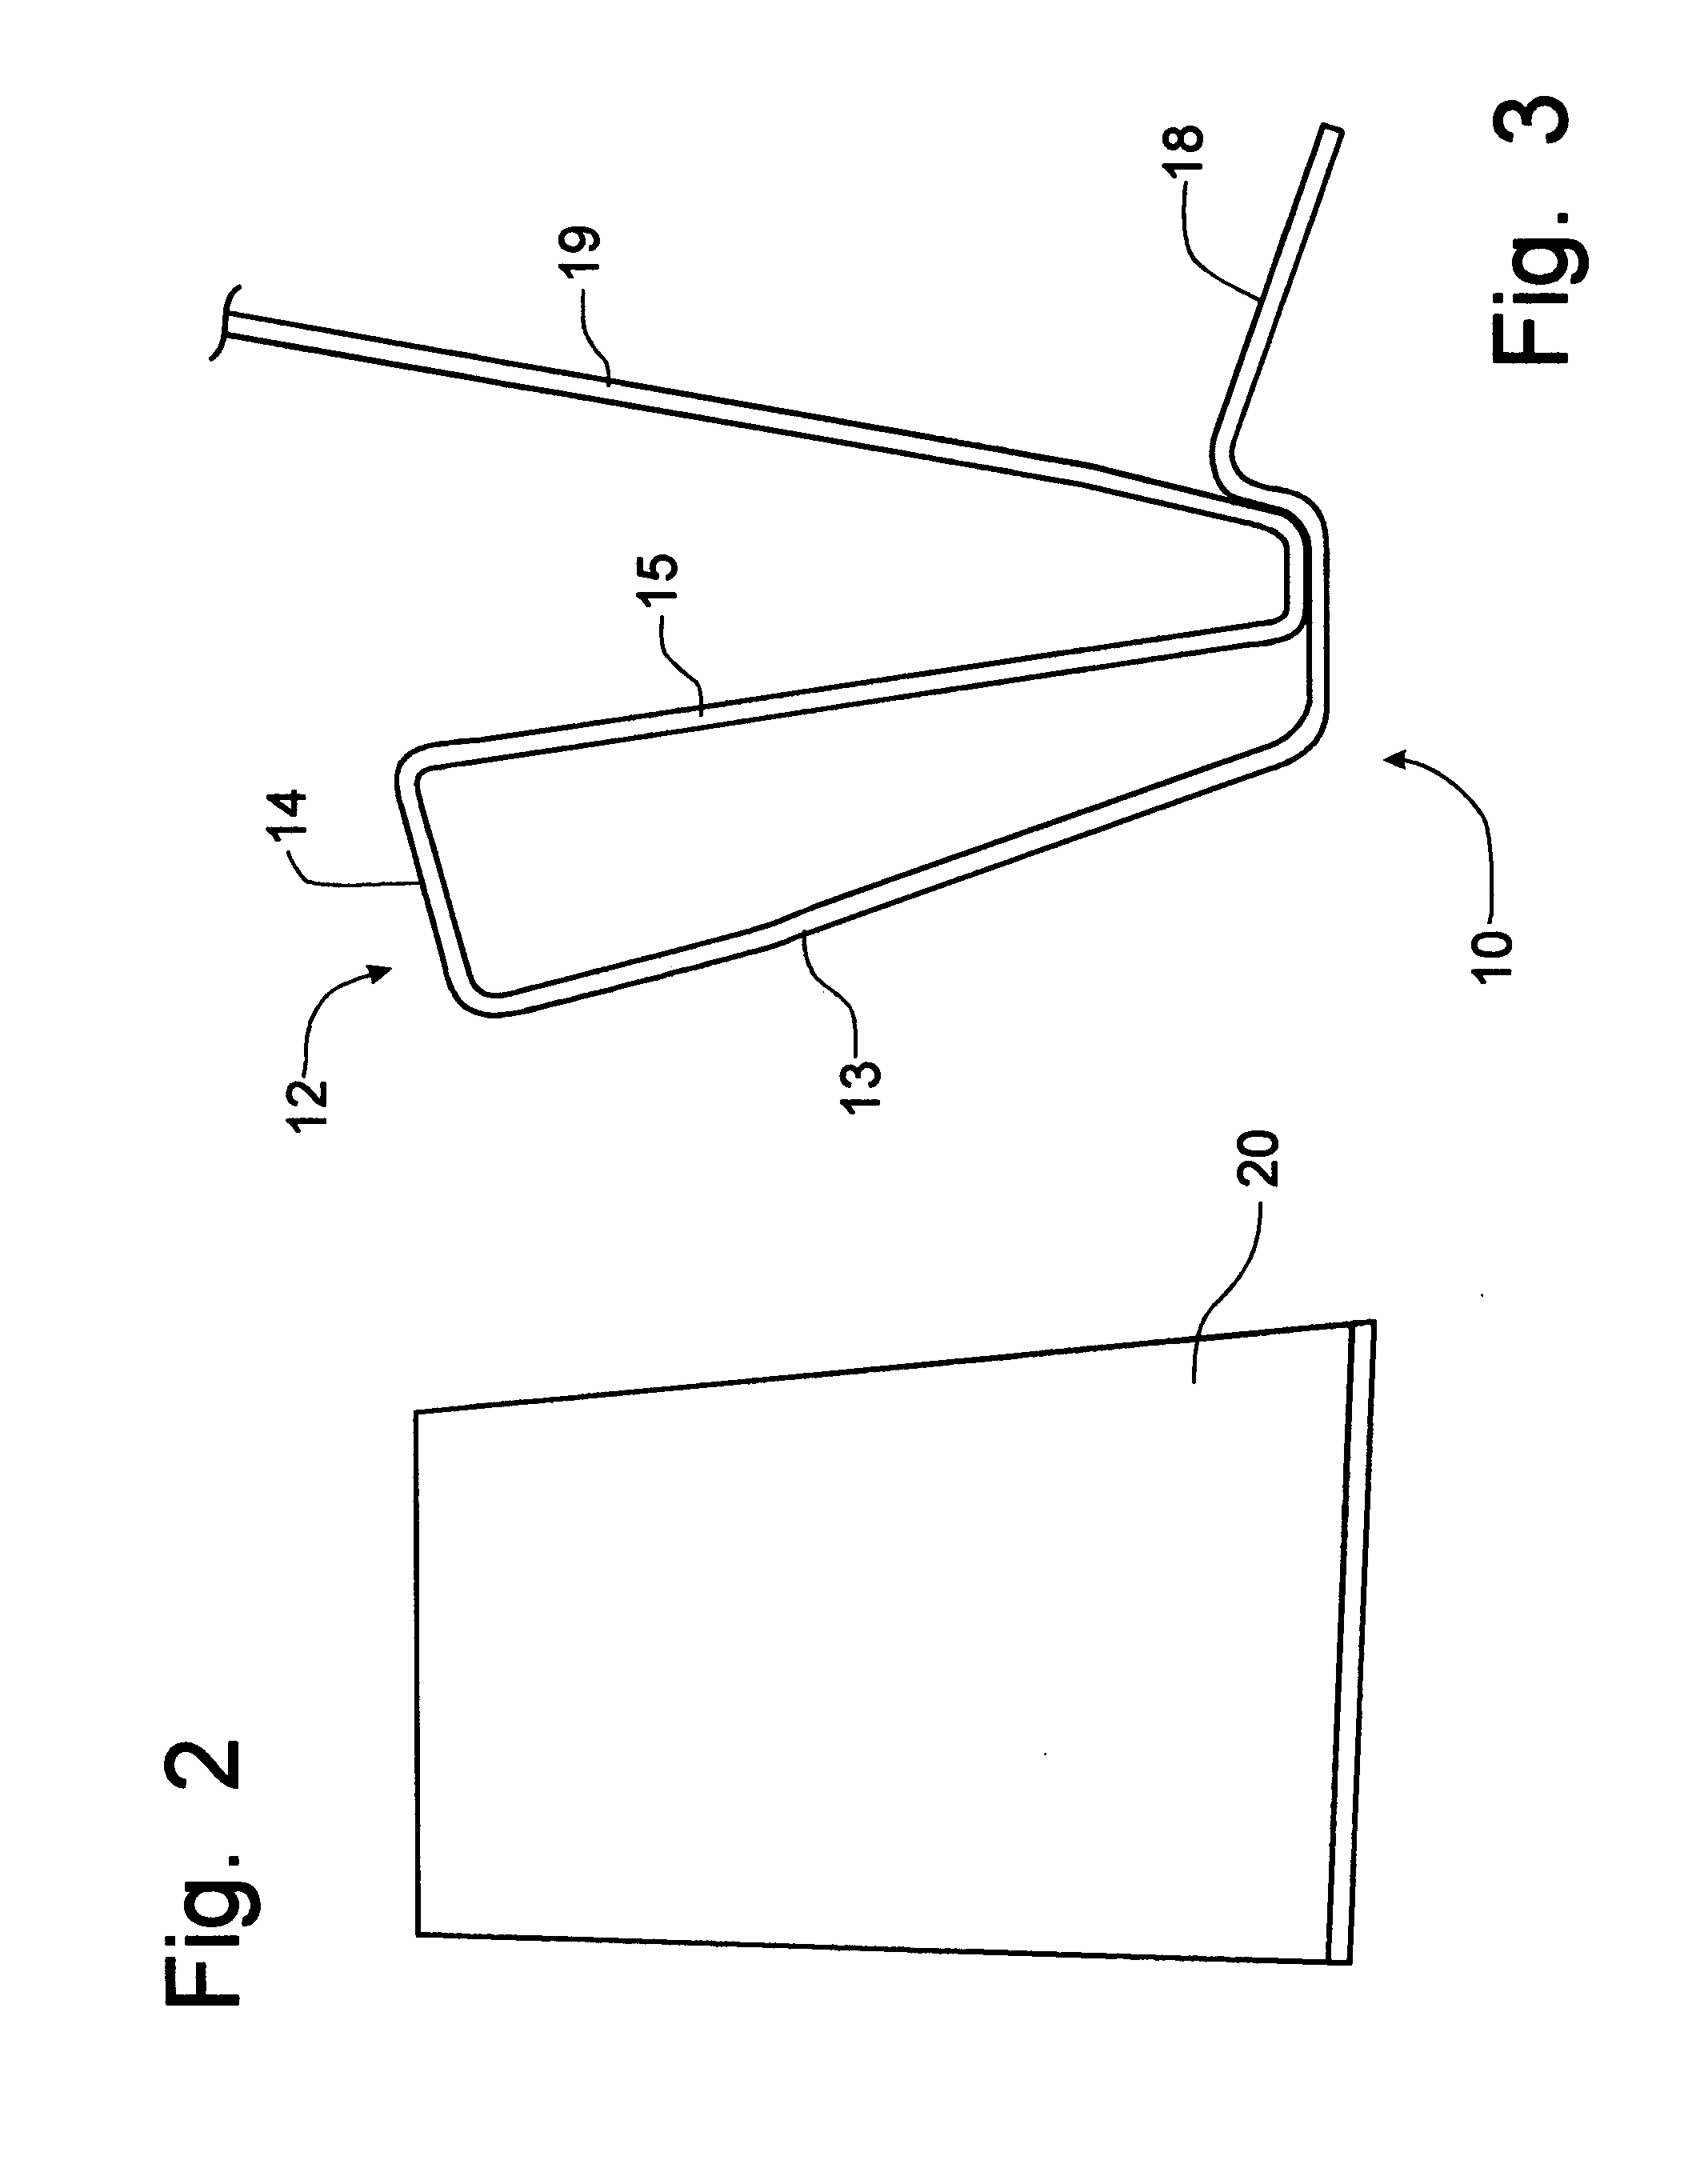 Roll-formed structural member with internal web